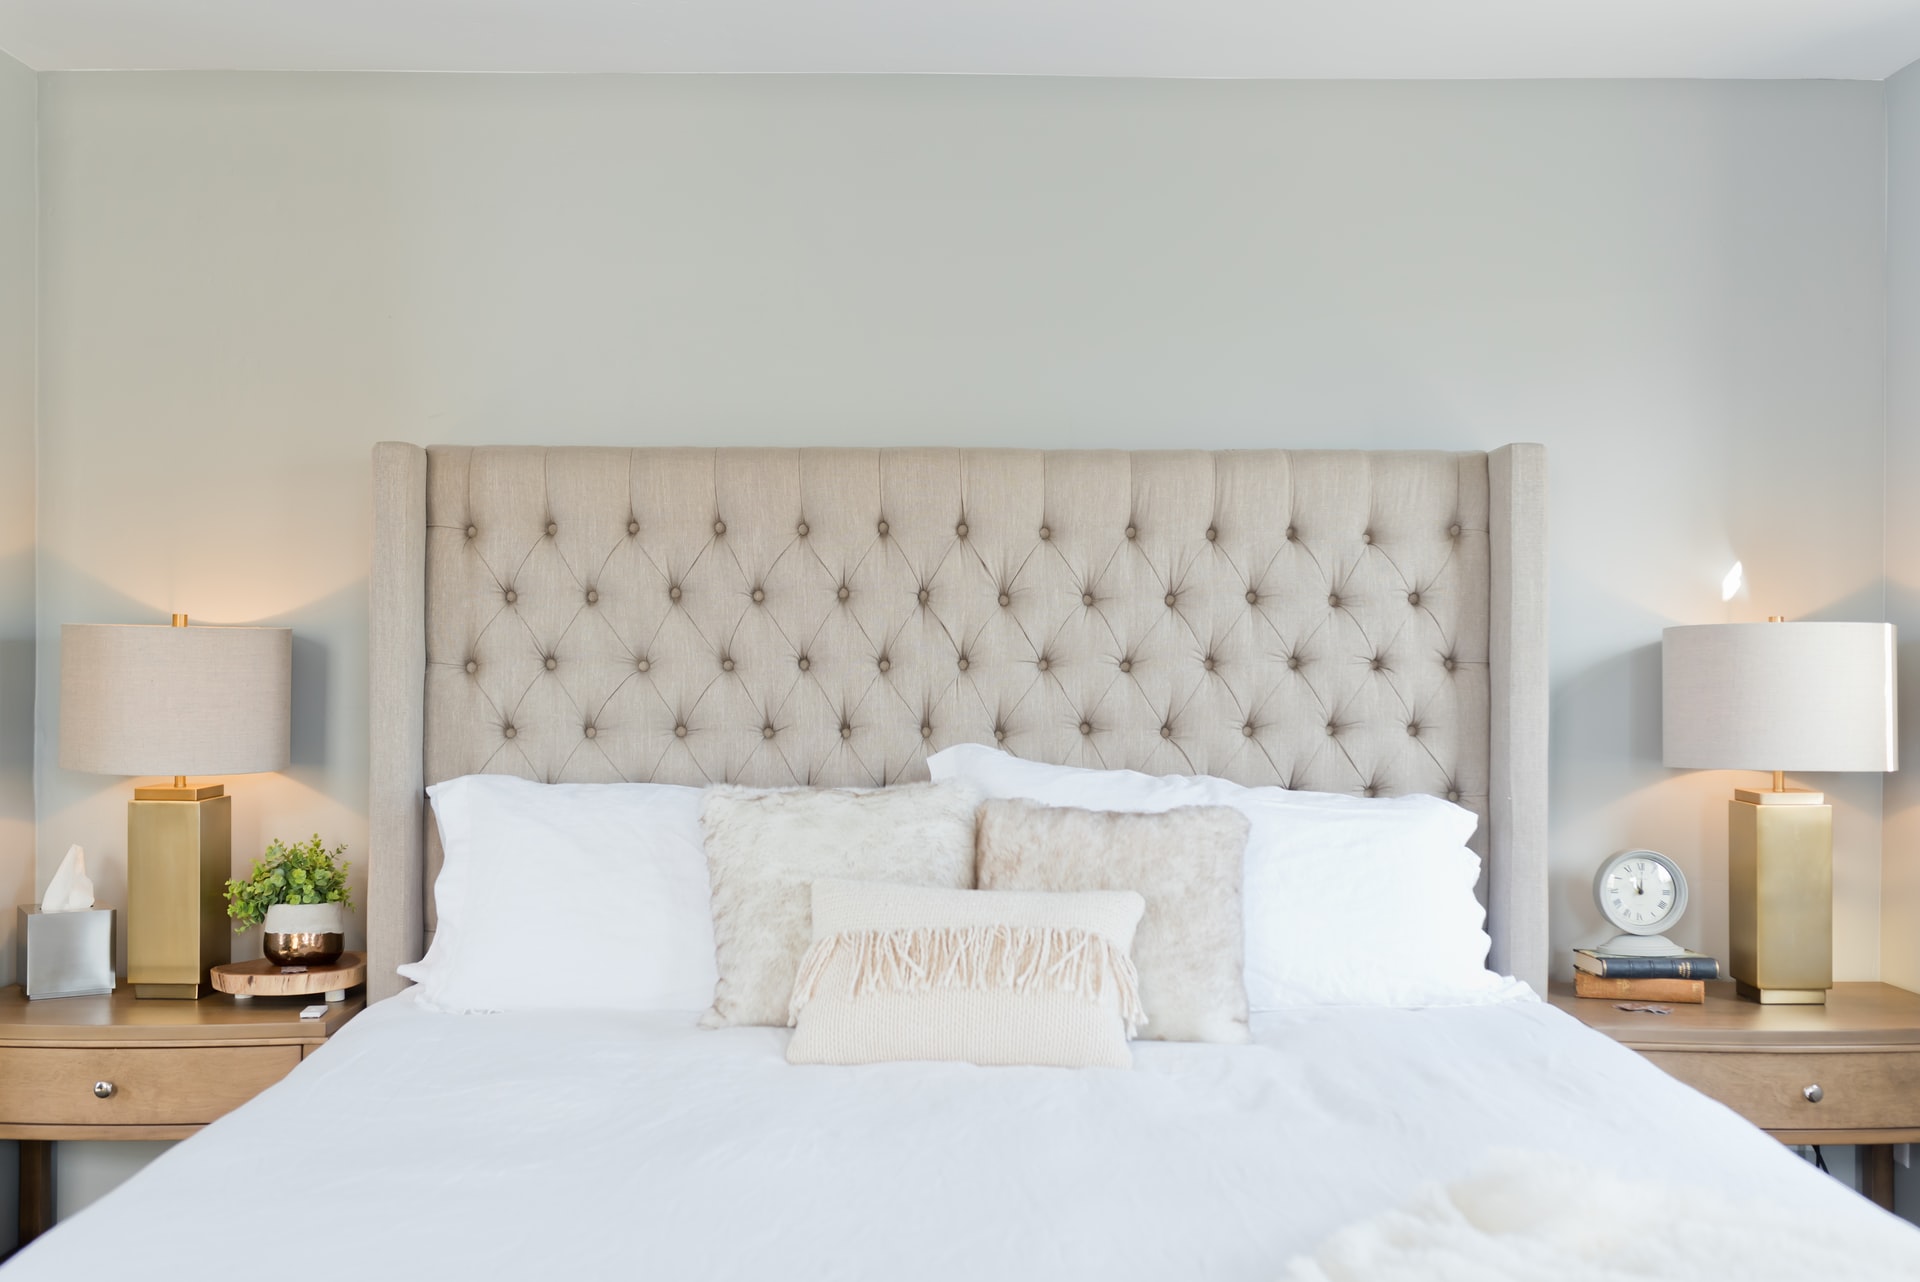 We love seeing how happy customers have styled their new DUSK bedding for  ultimate #BedGoals